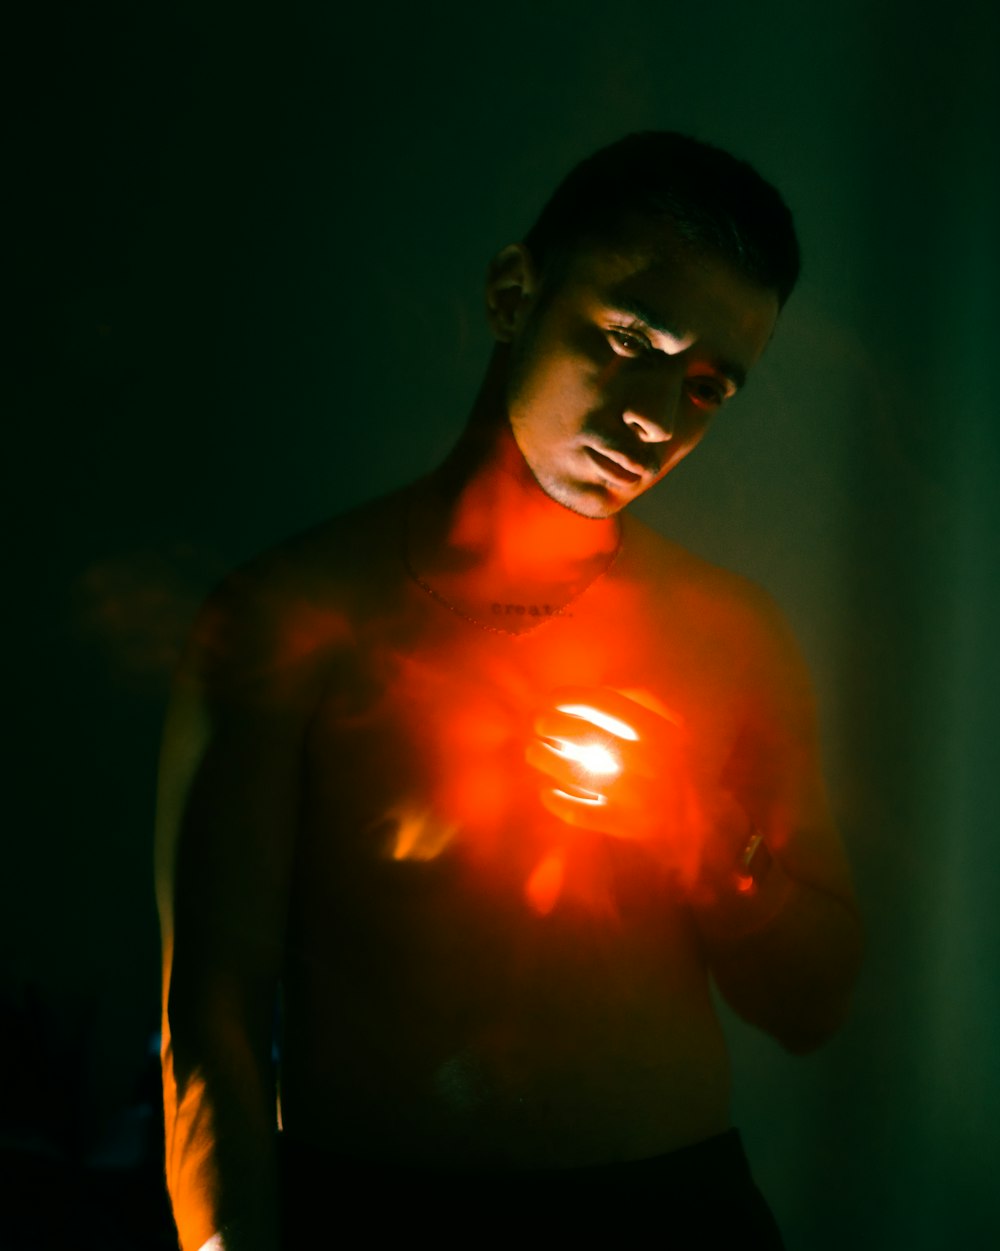 a man holding a glowing object in his hands